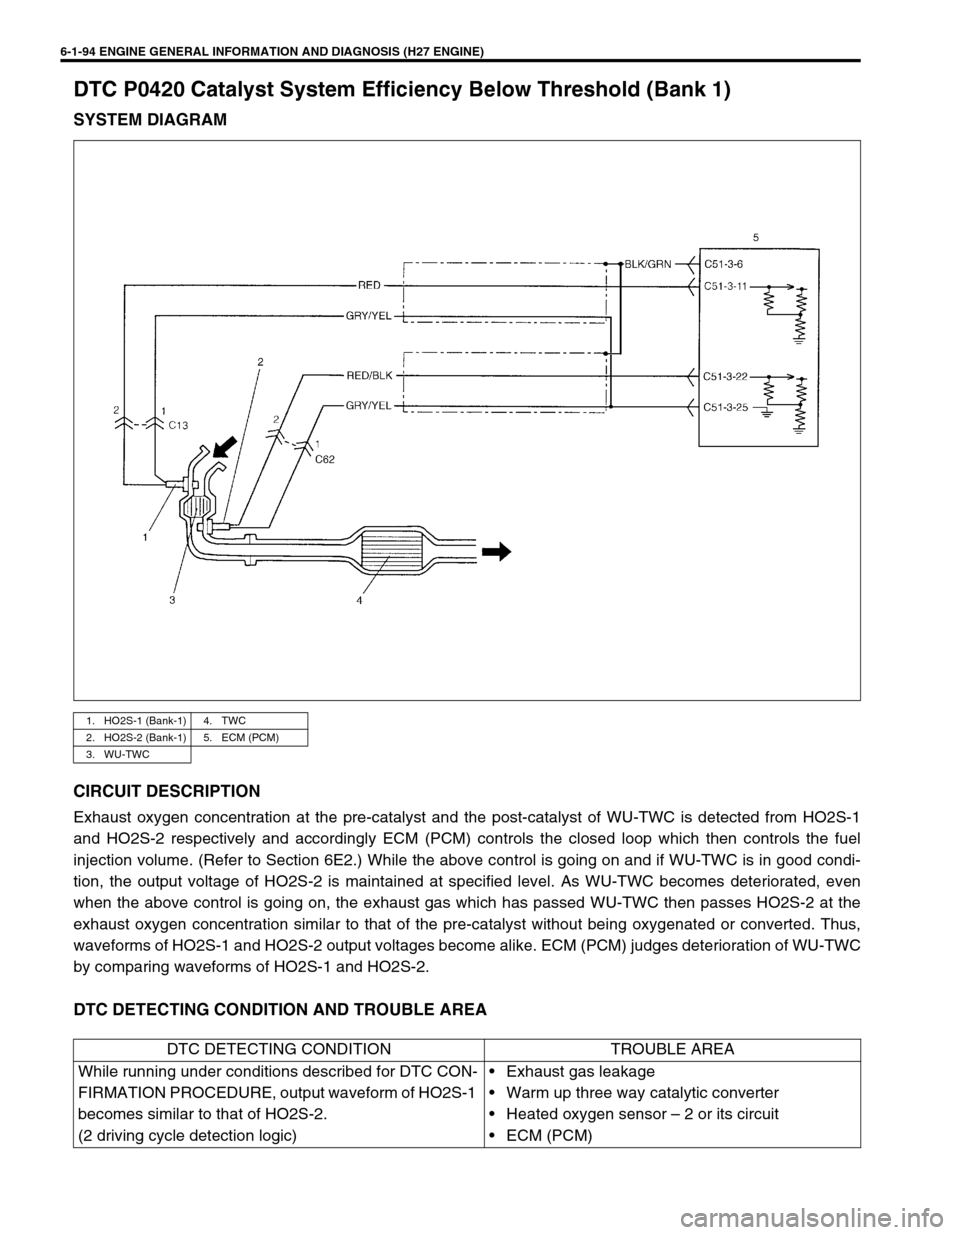 SUZUKI GRAND VITARA 1999 2.G User Guide 6-1-94 ENGINE GENERAL INFORMATION AND DIAGNOSIS (H27 ENGINE)
DTC P0420 Catalyst System Efficiency Below Threshold (Bank 1)
SYSTEM DIAGRAM
CIRCUIT DESCRIPTION
Exhaust oxygen concentration at the pre-ca